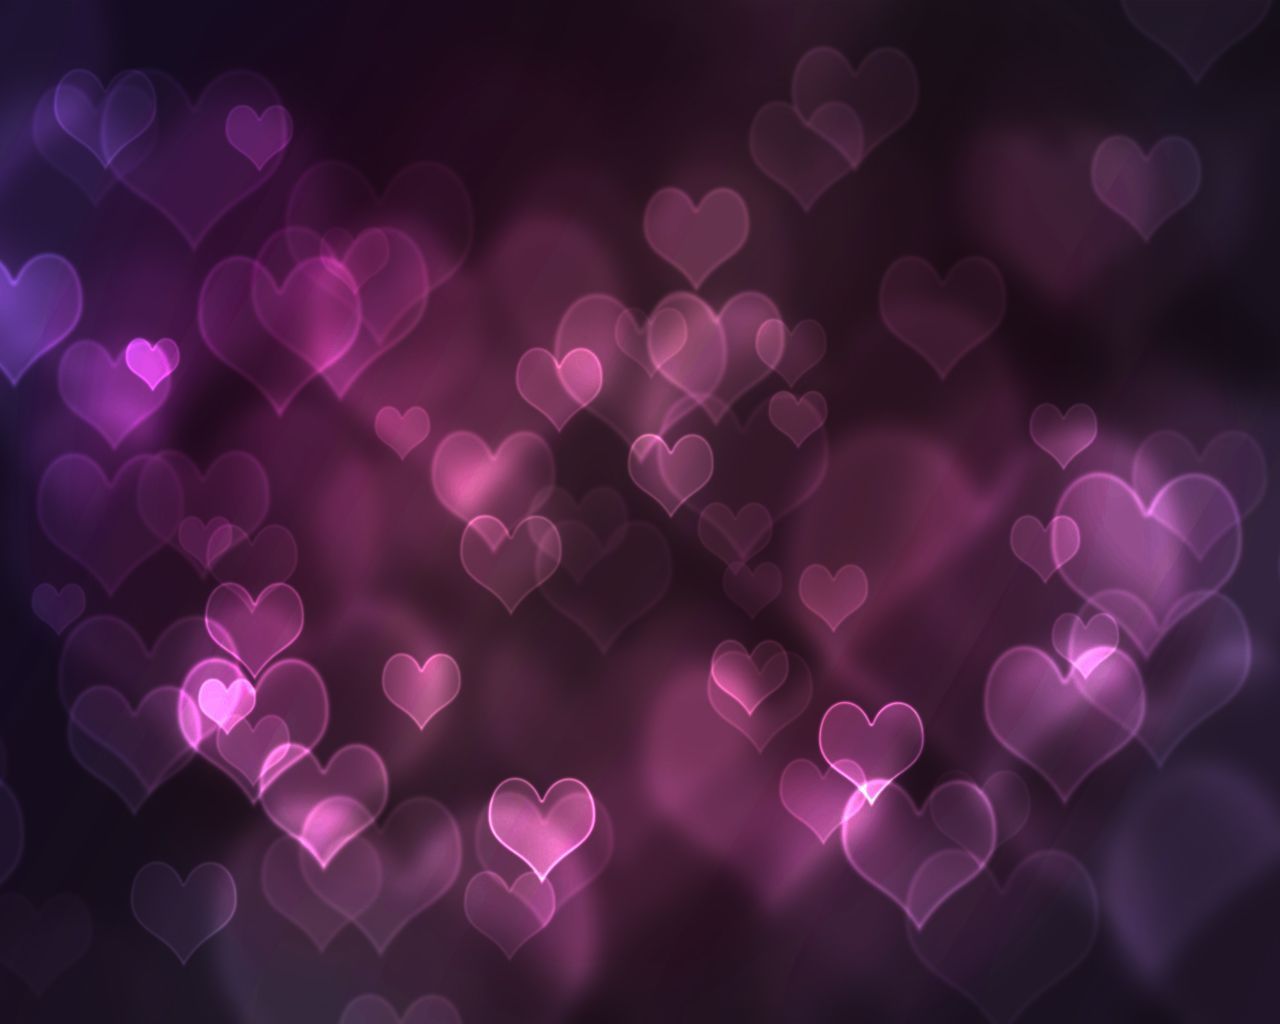 Wallpapers for pretty purple backgrounds tumblr HD Wallpapers Range